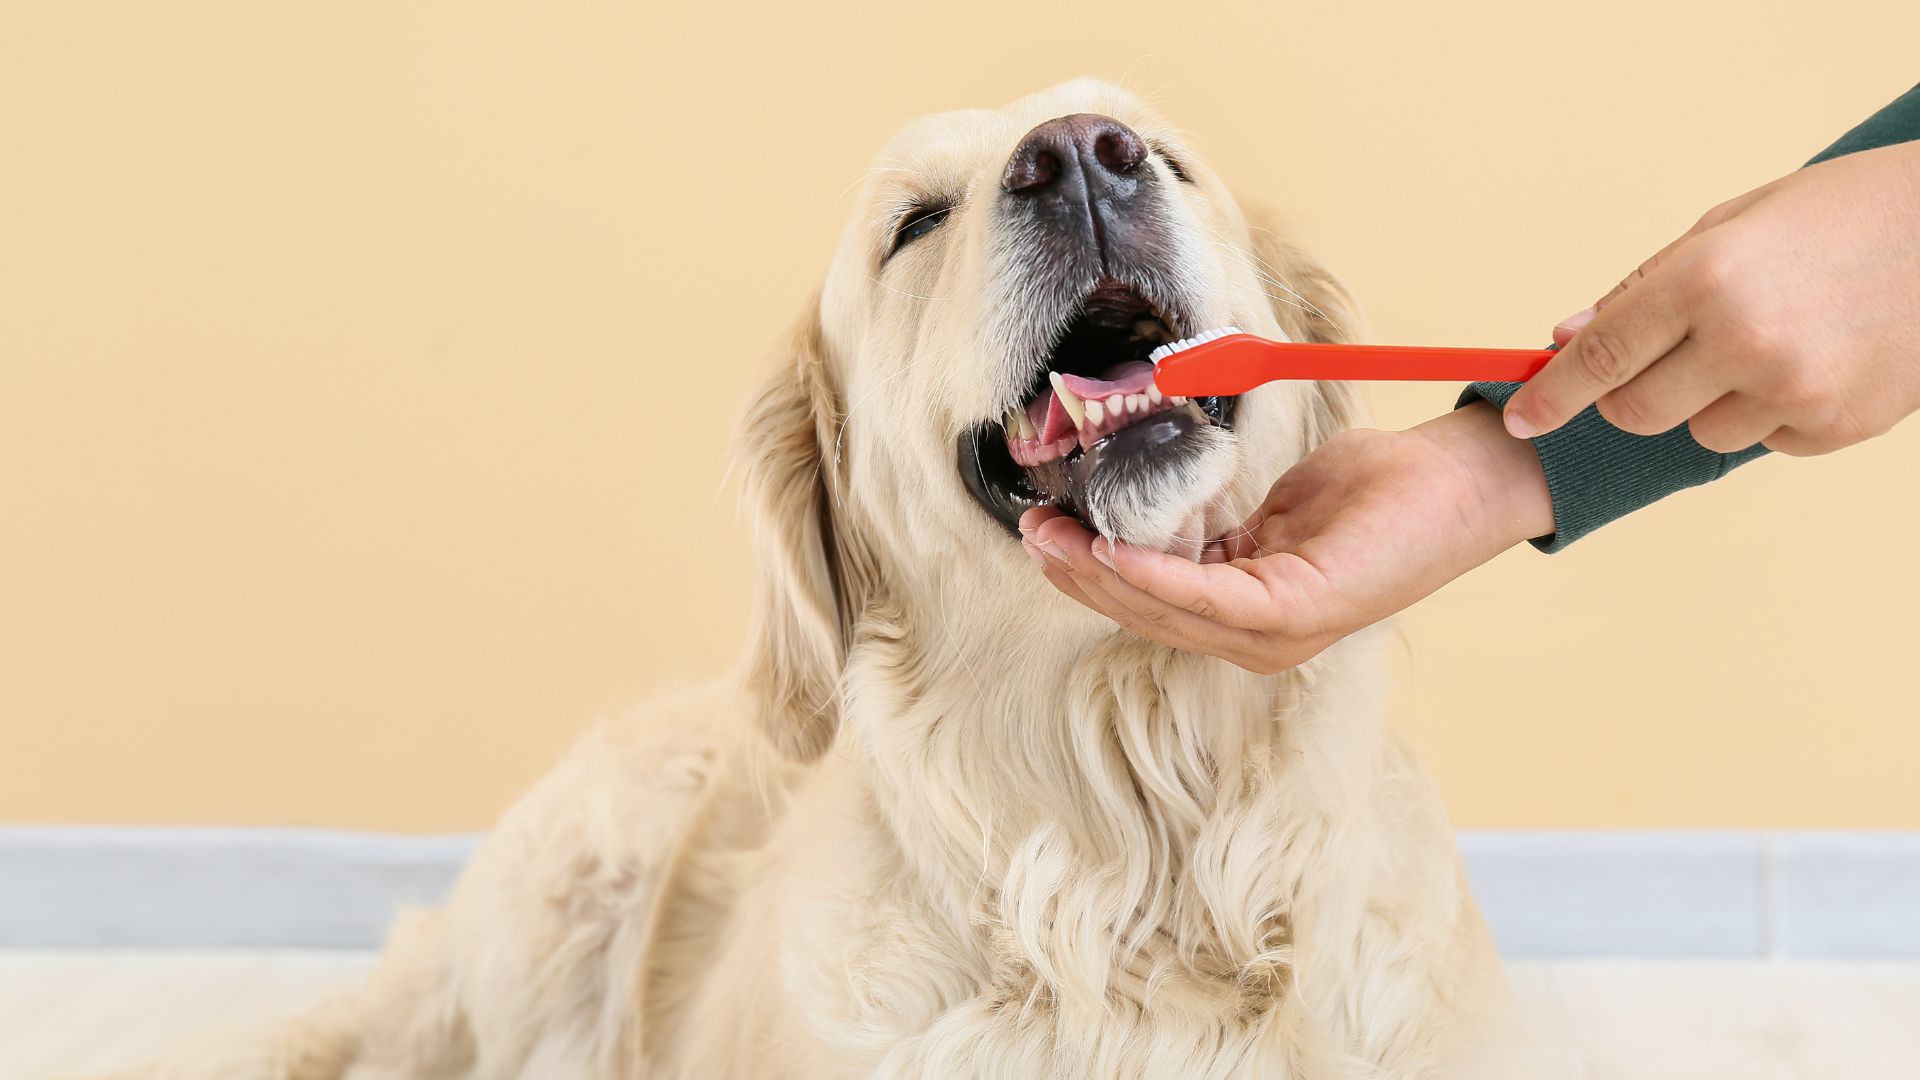 a dog with its mouth open being brushed by a hand